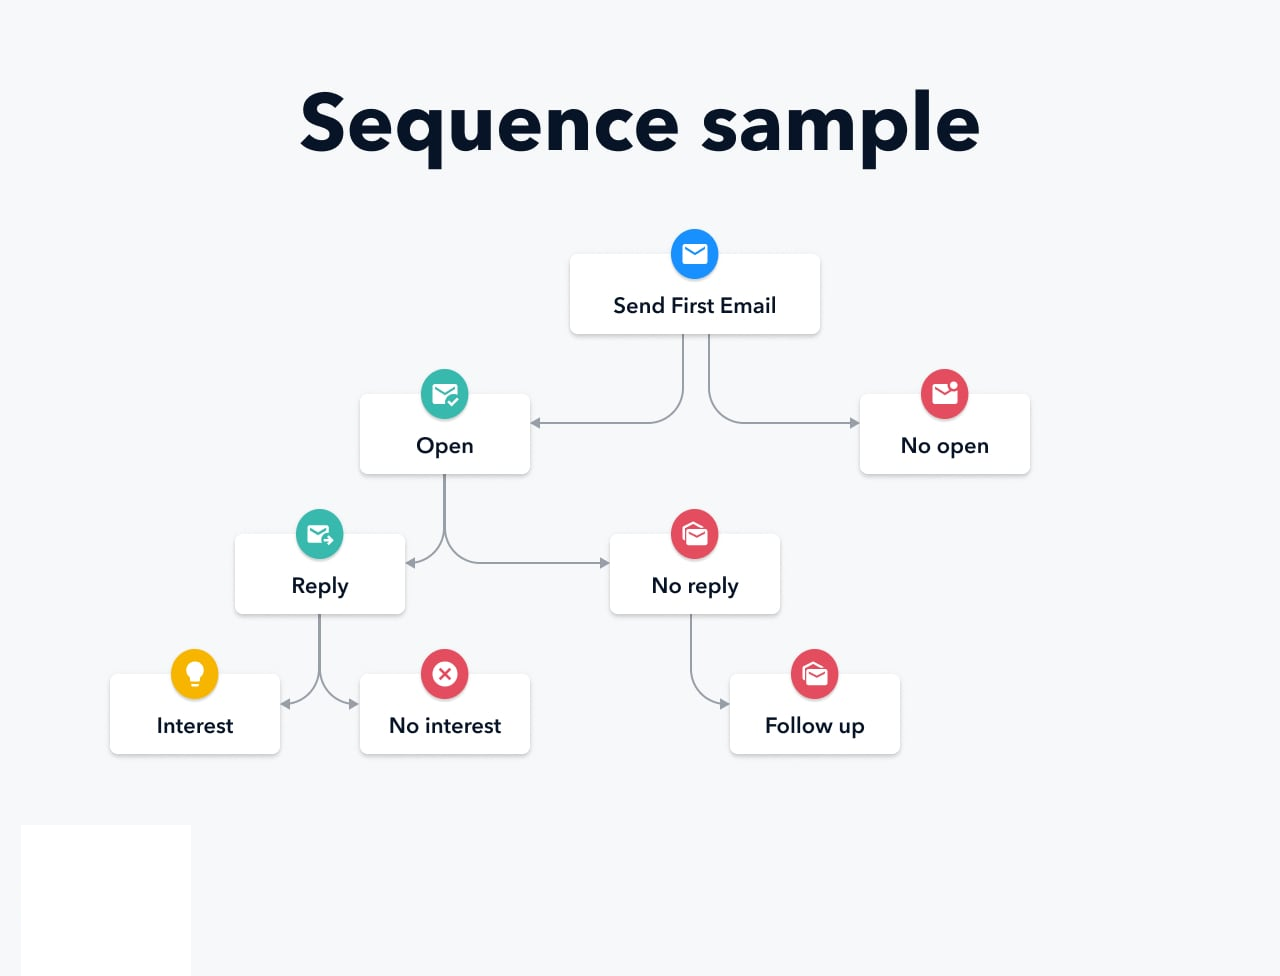 Cold email sequence sample shown by a diagram